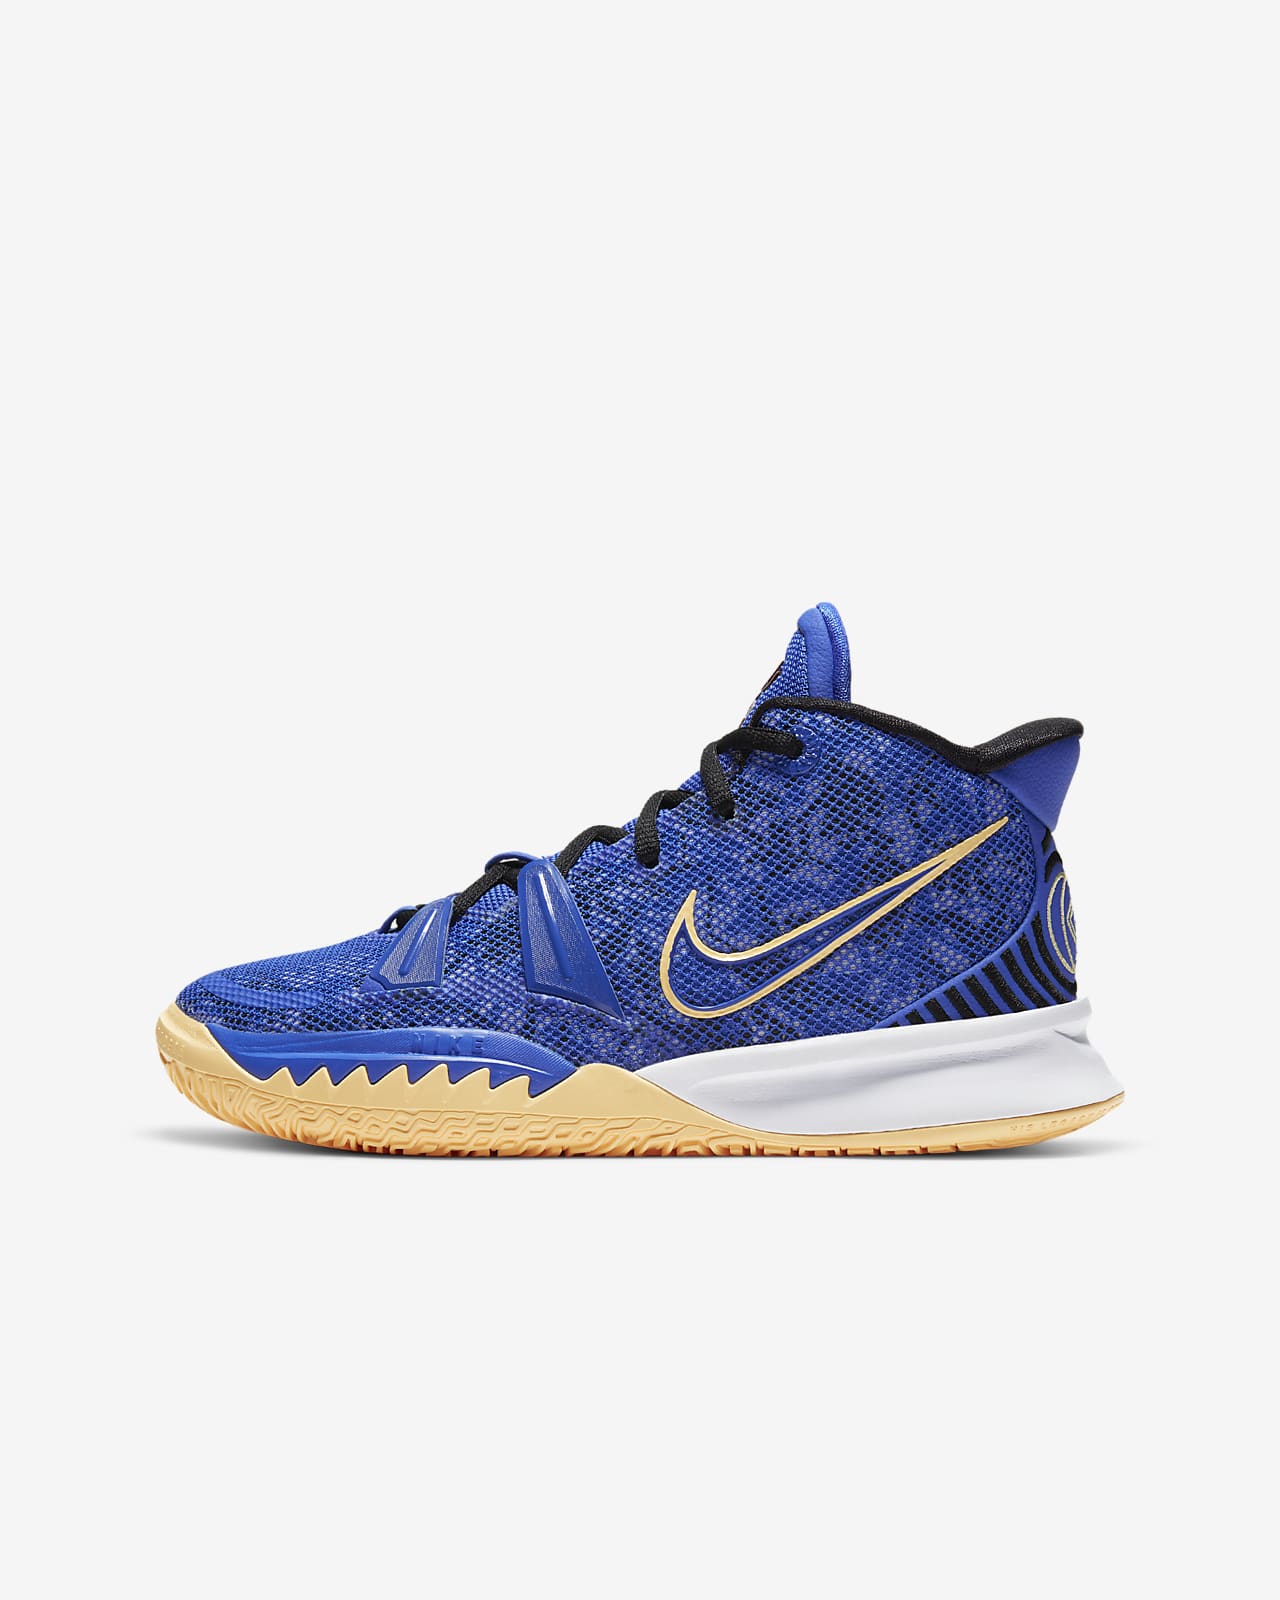 kyrie shoes on sale